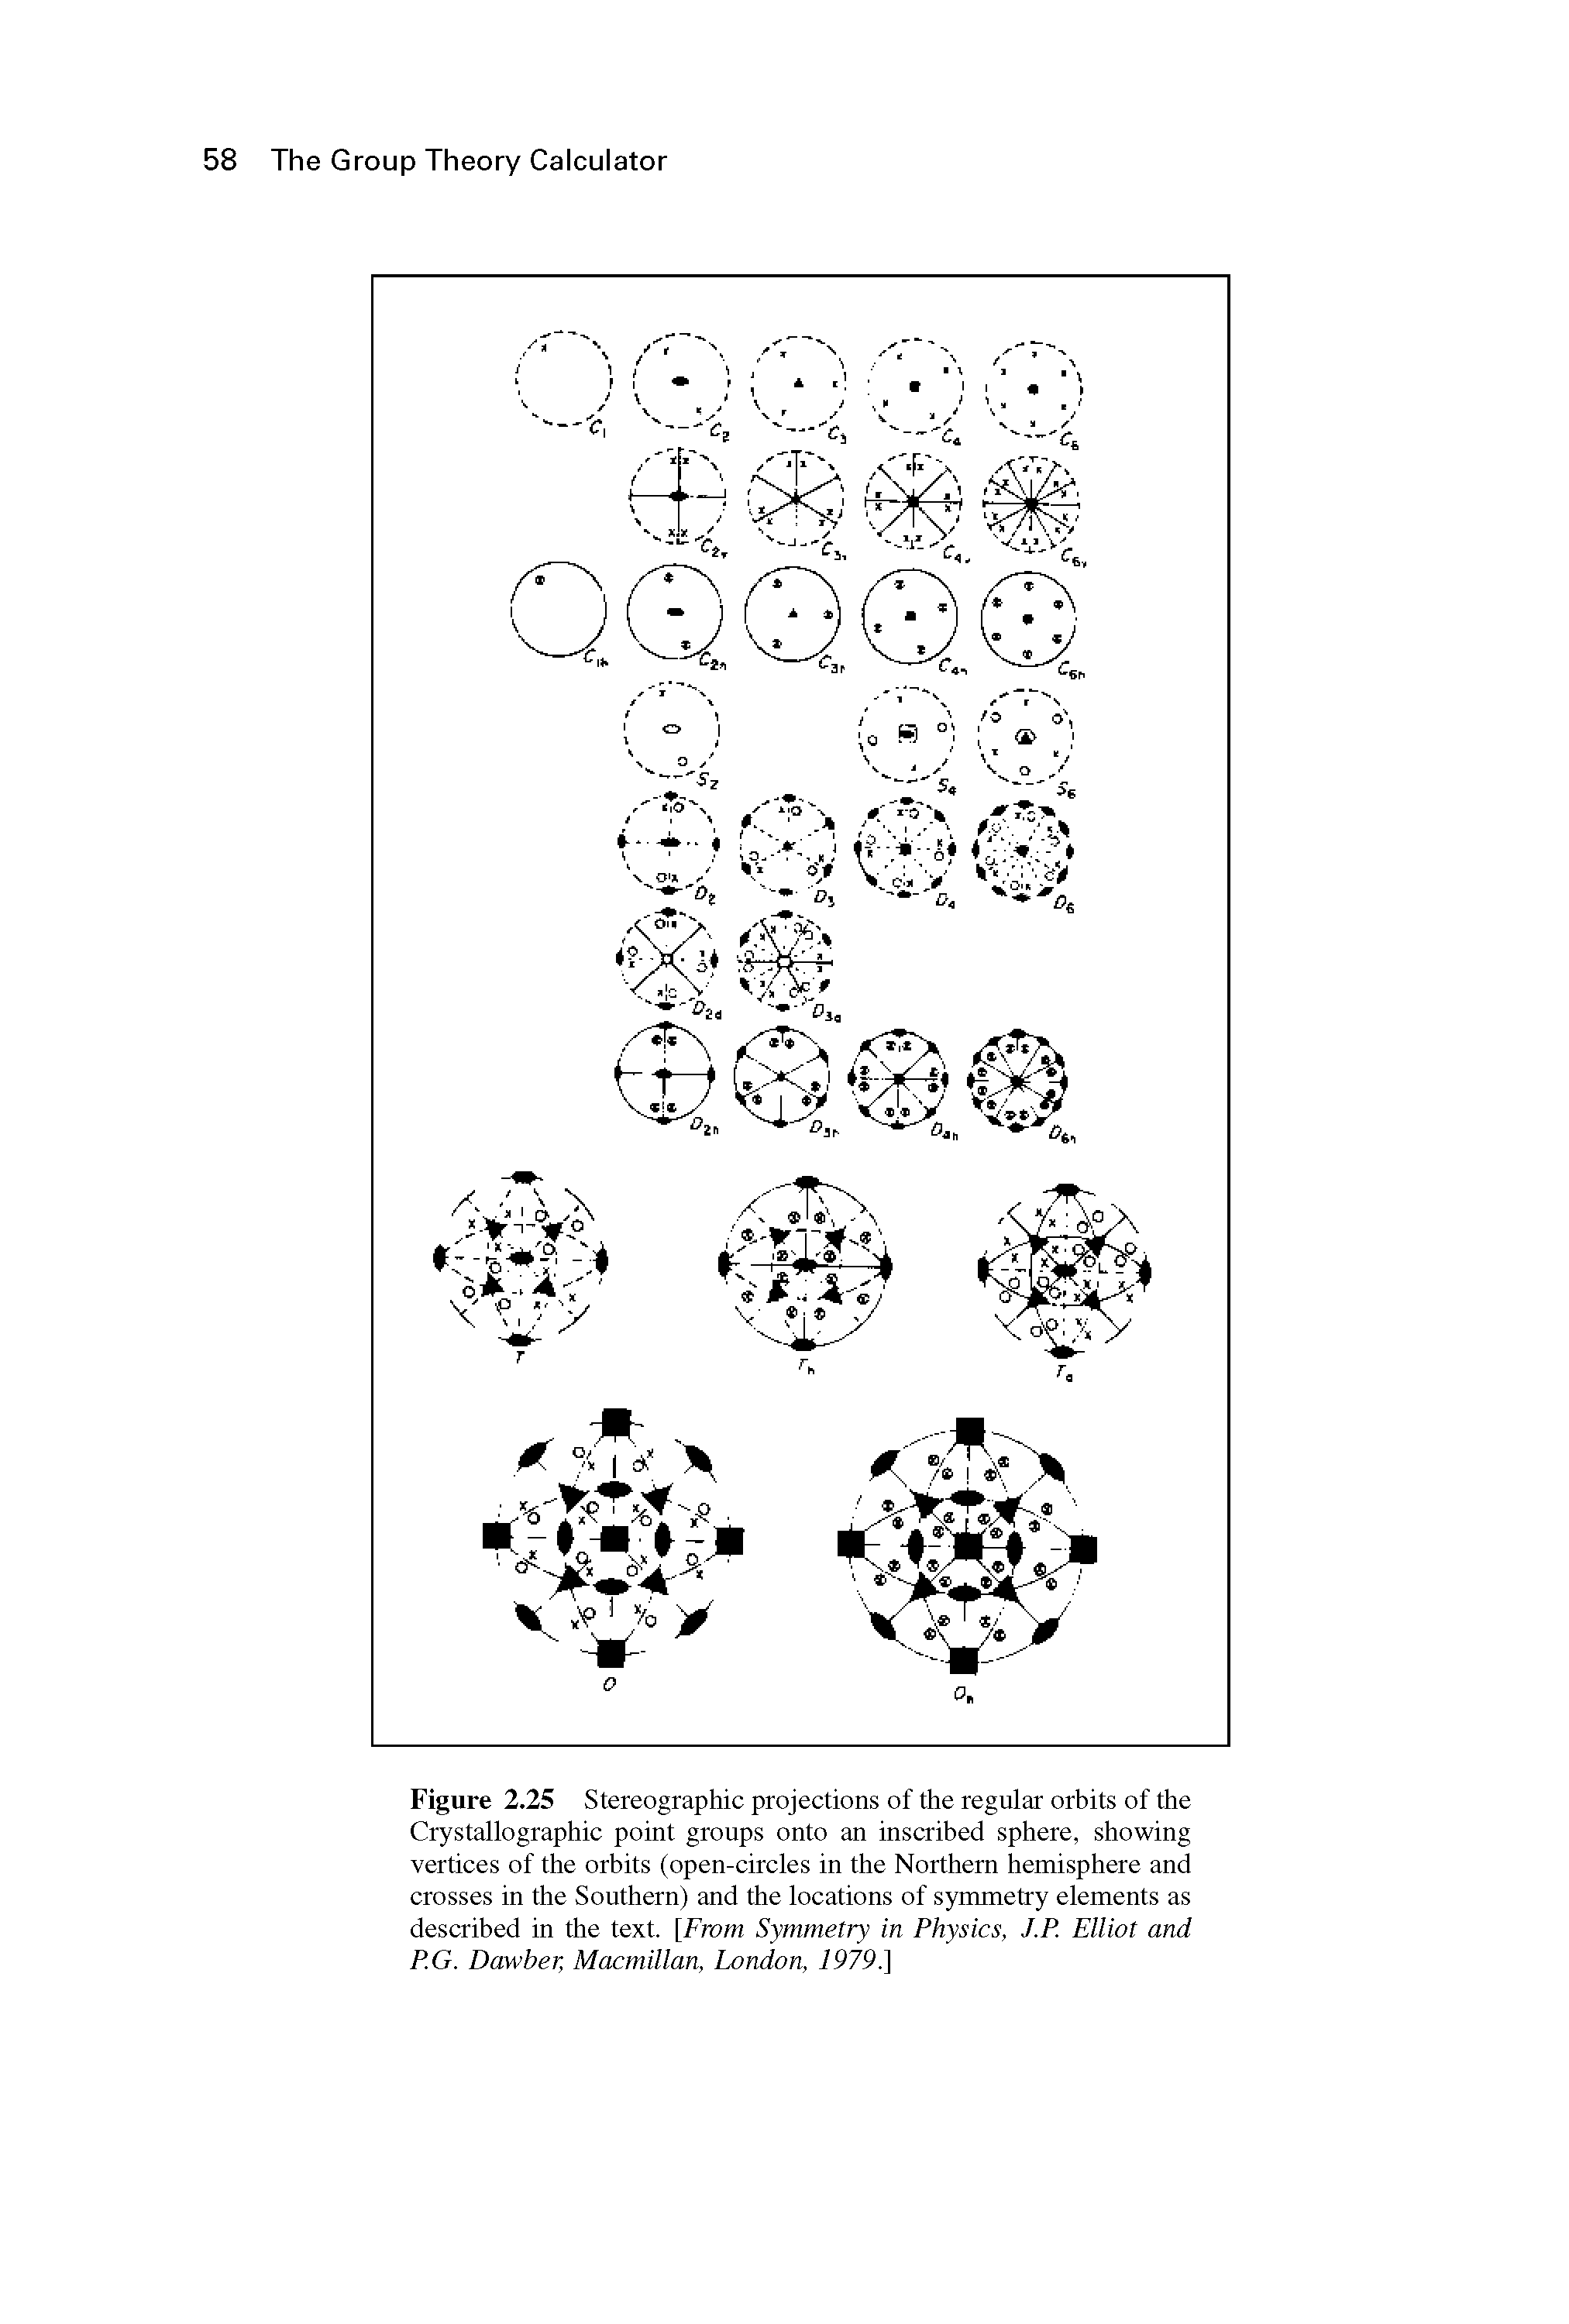 Figure 2.25 Stereographic projections of the regular orbits of the Crystallographic point groups onto an inscribed sphere, showing vertices of the orbits (open-circles in the Northern hemisphere and crosses in the Southern) and the locations of symmetry elements as described in the text. [From Symmetry in Physics, J.P. Elliot and PG. Dawber, Macmillan, London, 1979.]...